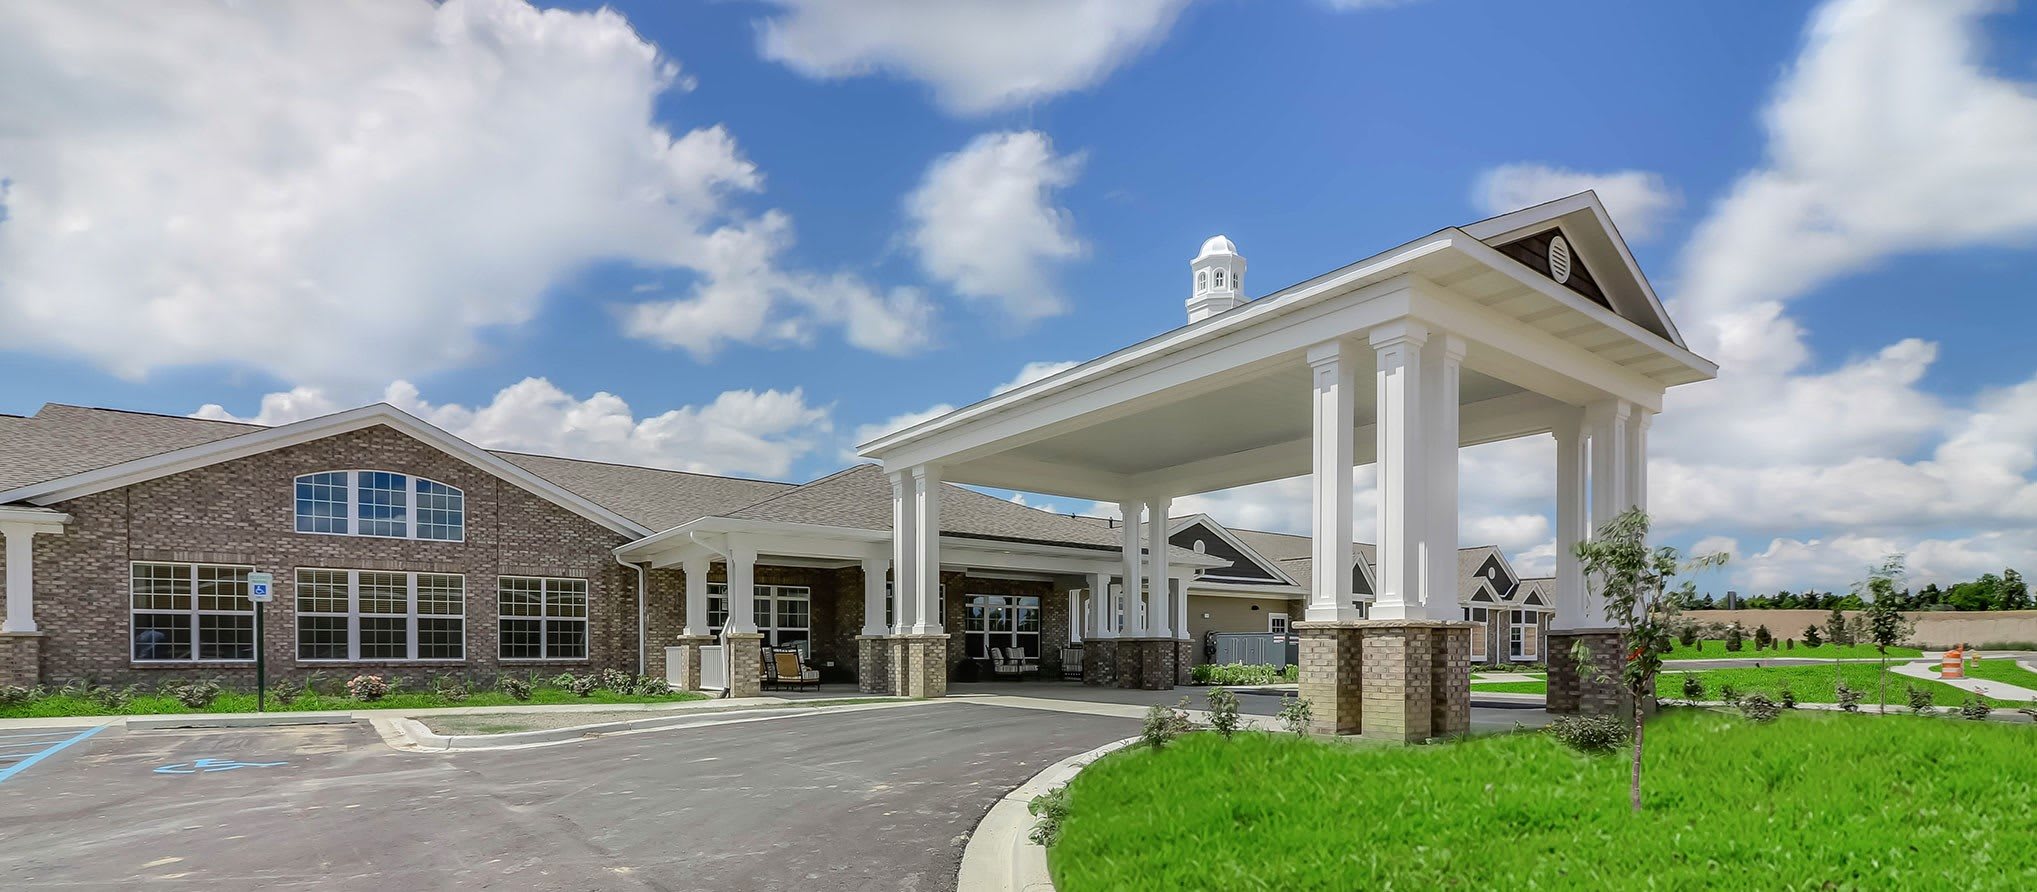 Springvale Assisted Living & Memory Care Community Exterior